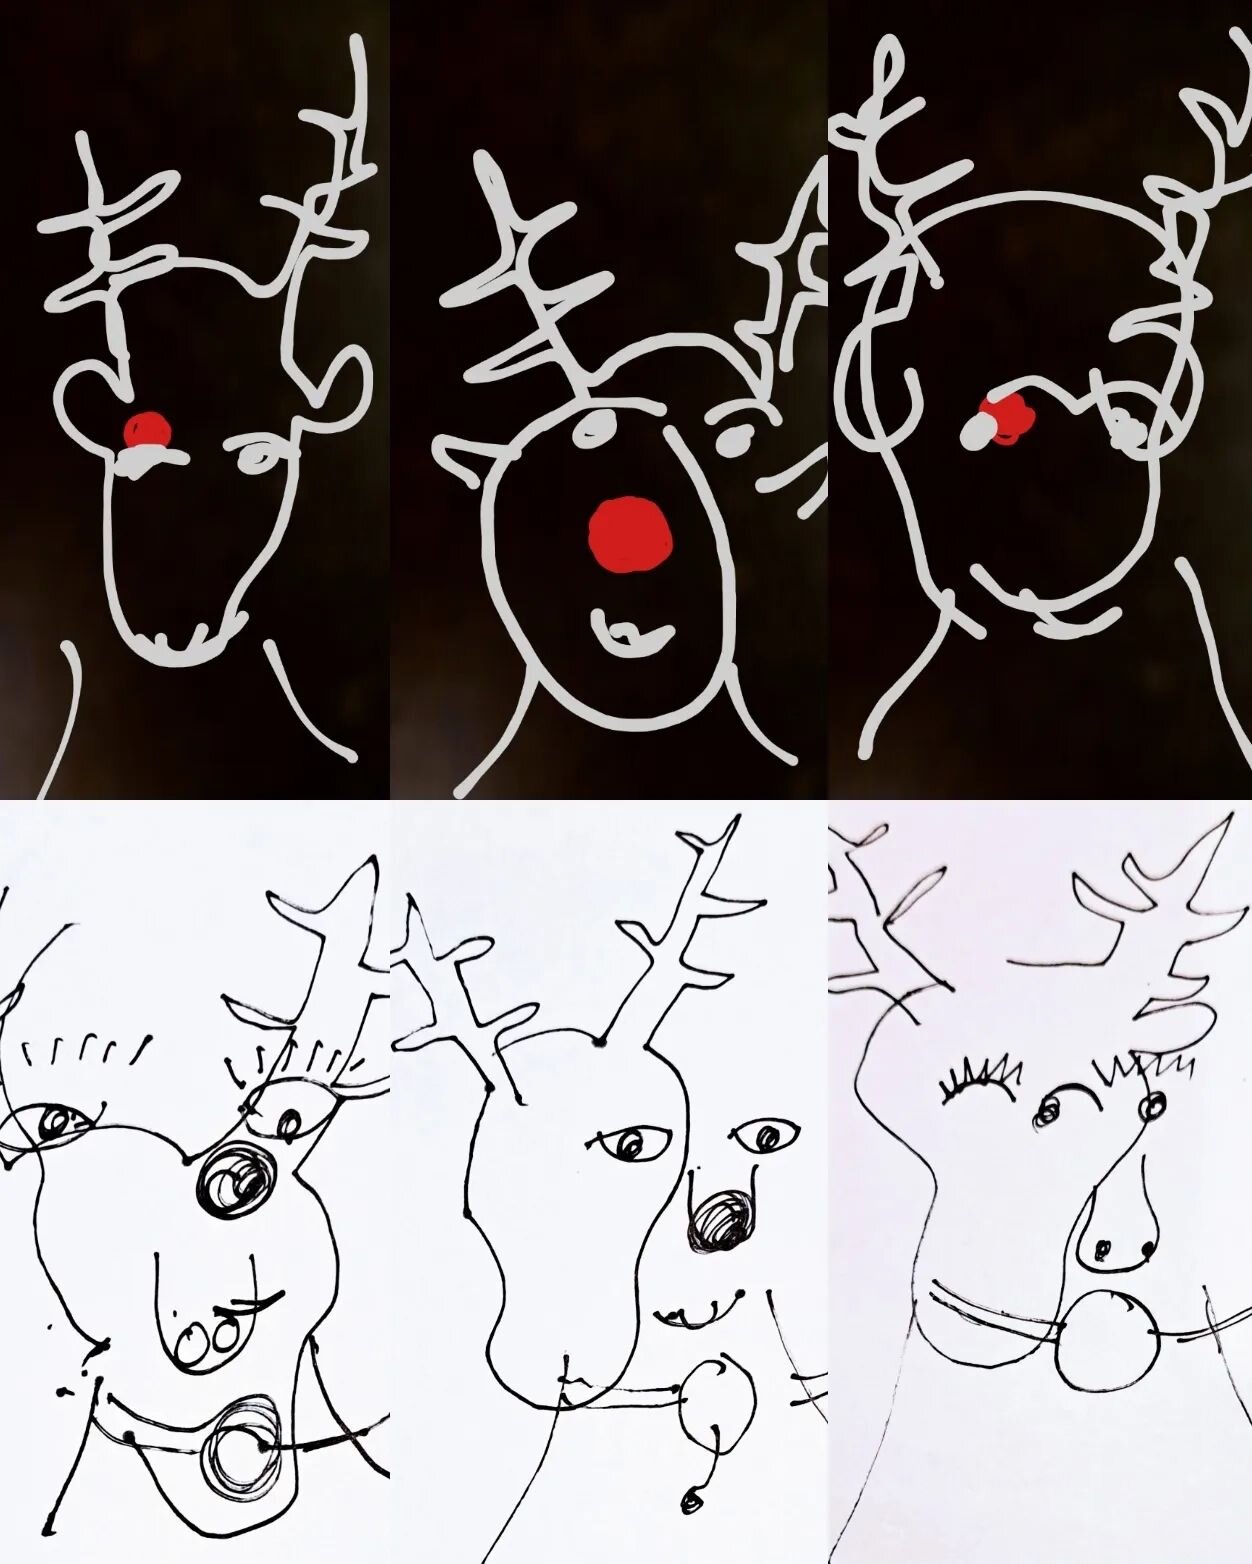 TRY IT❗️
Draw RUDOLPH around his #red #nose 🔴 with your eyes closed 
.
.
.
#thereseljoseph #design #drawing #canadianartist #swissartist #rudolph #christmas #raindeer #scribble #doodle